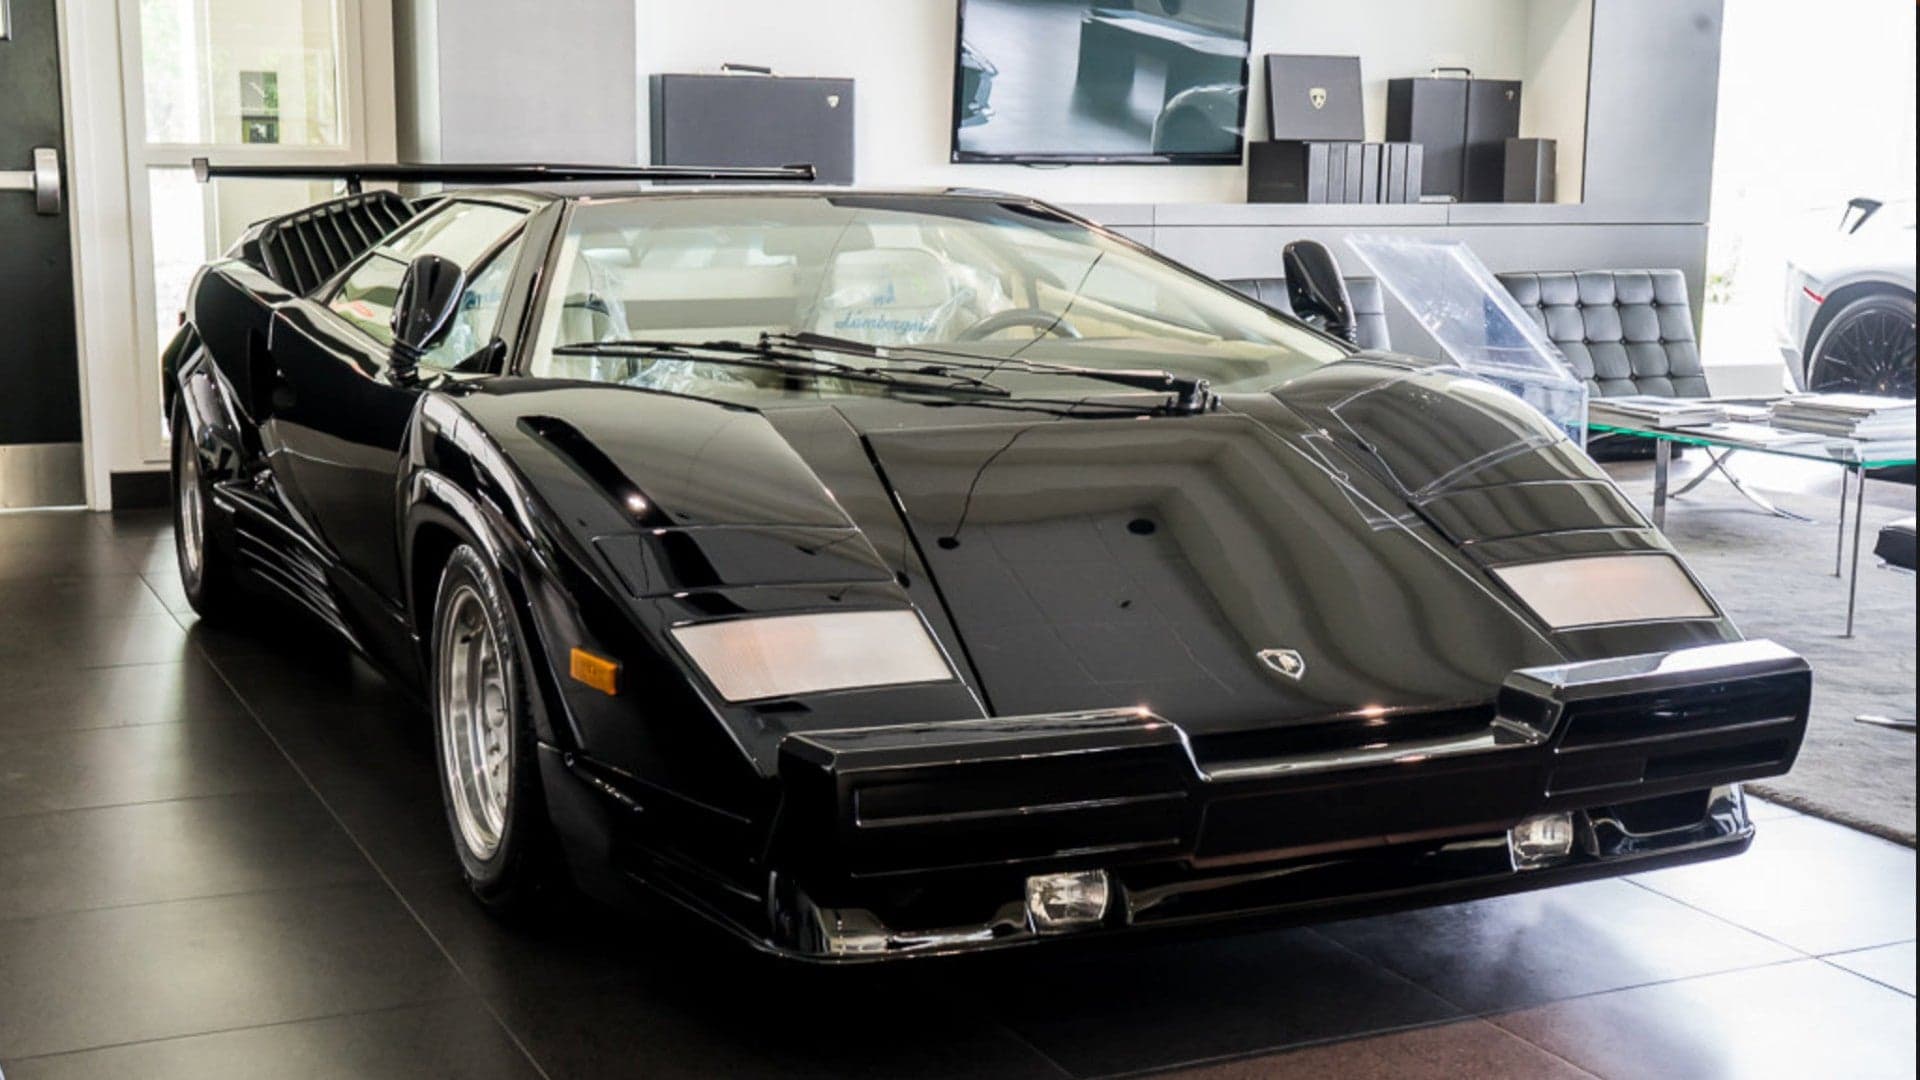 Only a Fool Would Keep a 1990 Lamborghini Countach With 84 Miles on the Clock